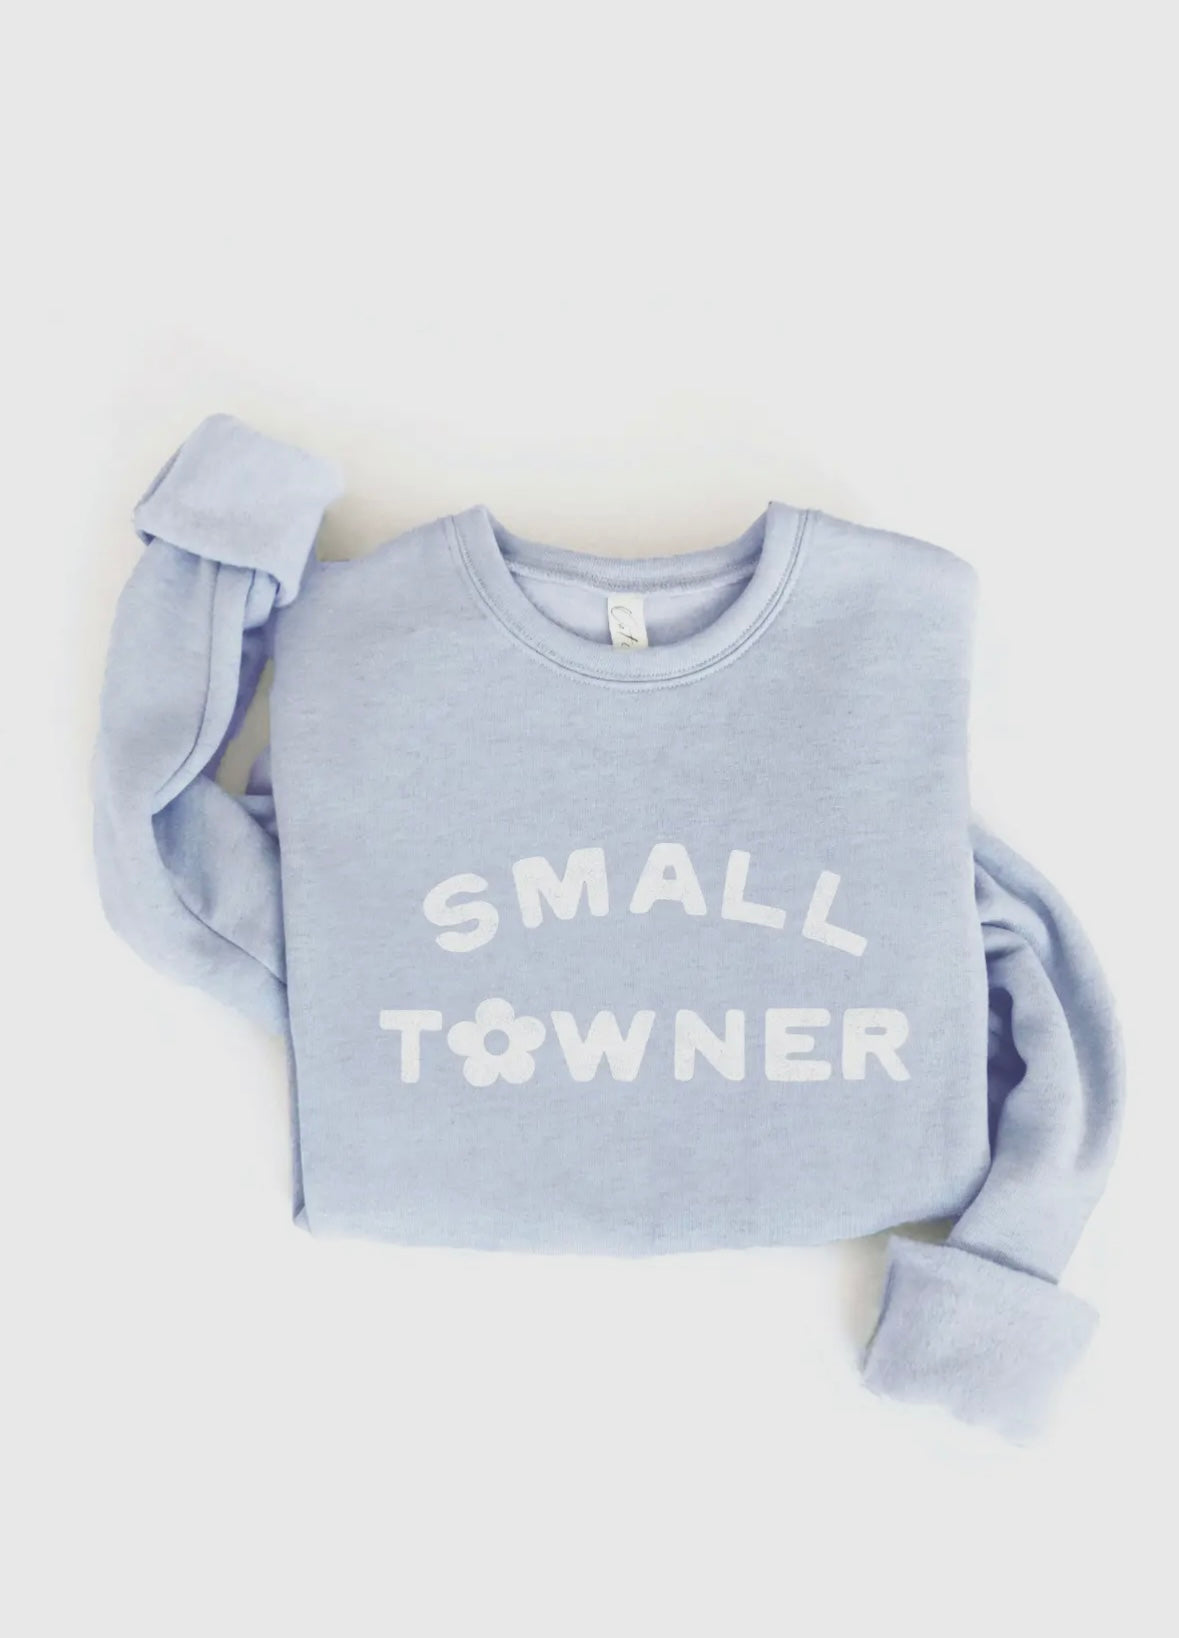 Small Towner Crew Sweater